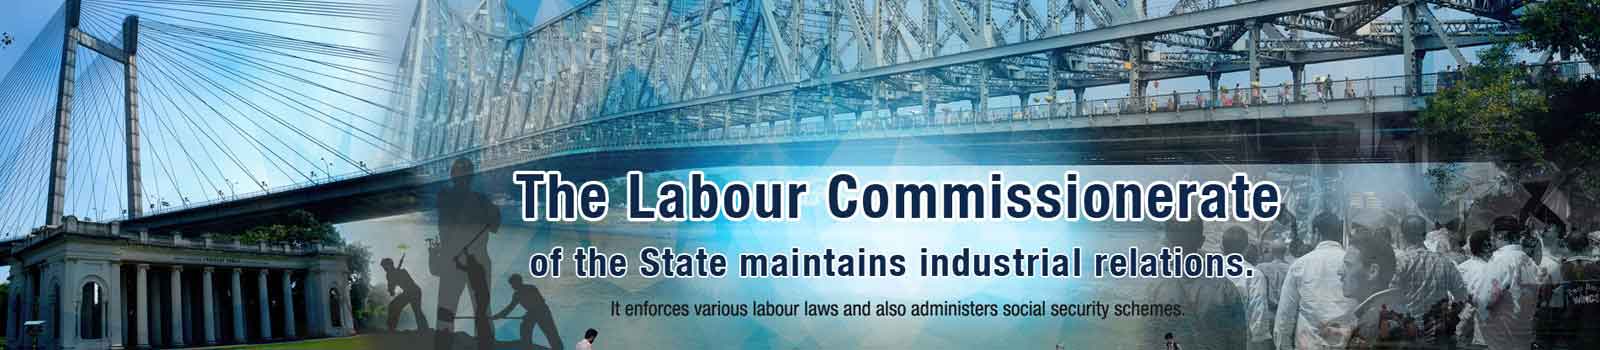 labour-commissionerate-west-bengal